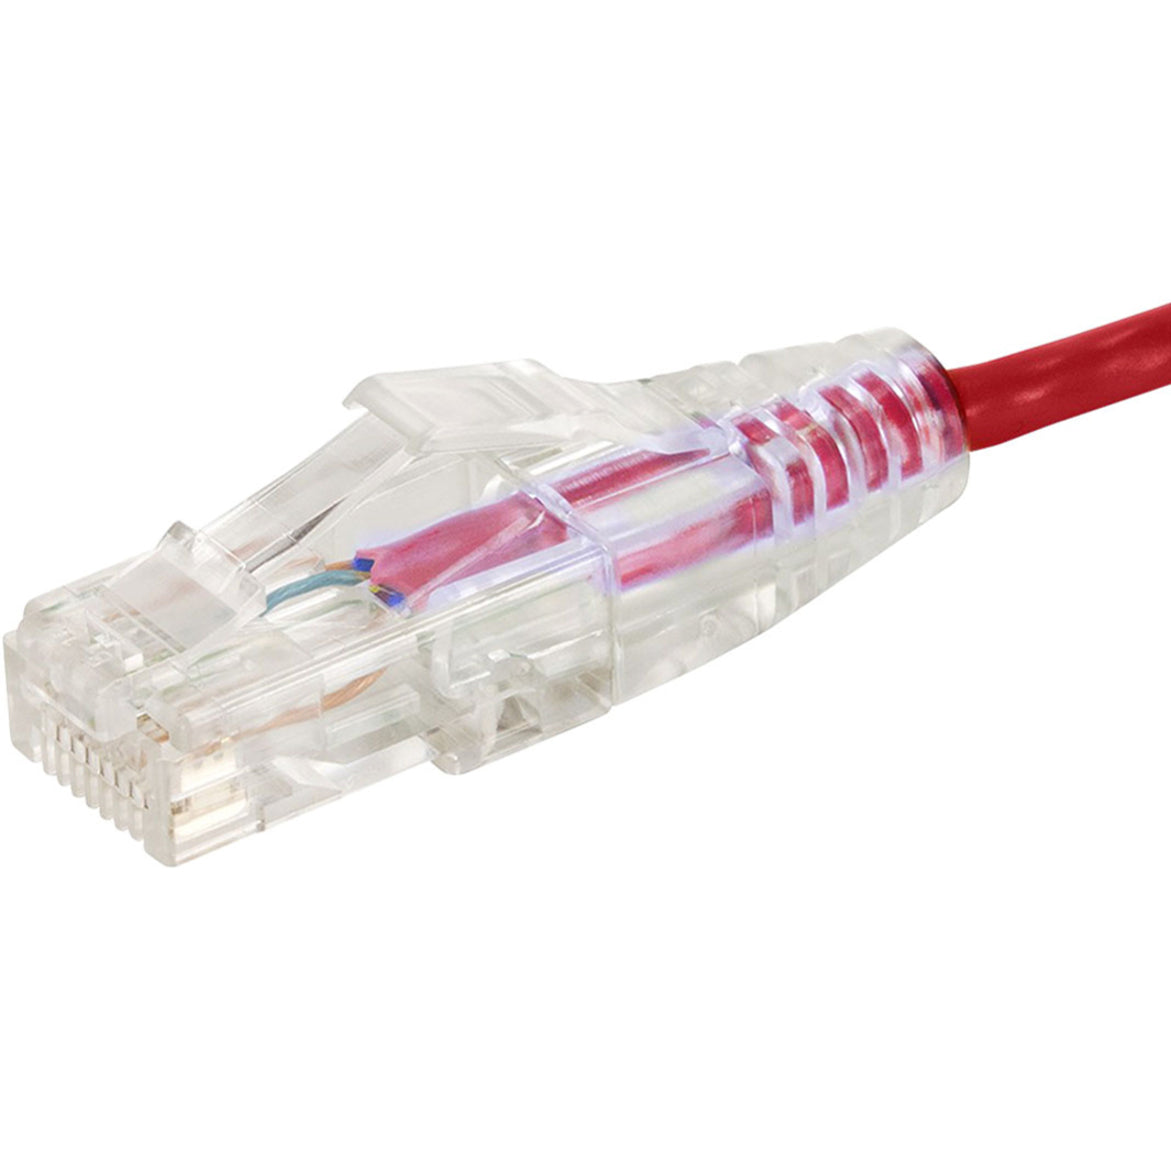 Monoprice 14793 SlimRun Cat6 28AWG UTP Ethernet Network Cable, 1ft Red, Flexible, Snagless